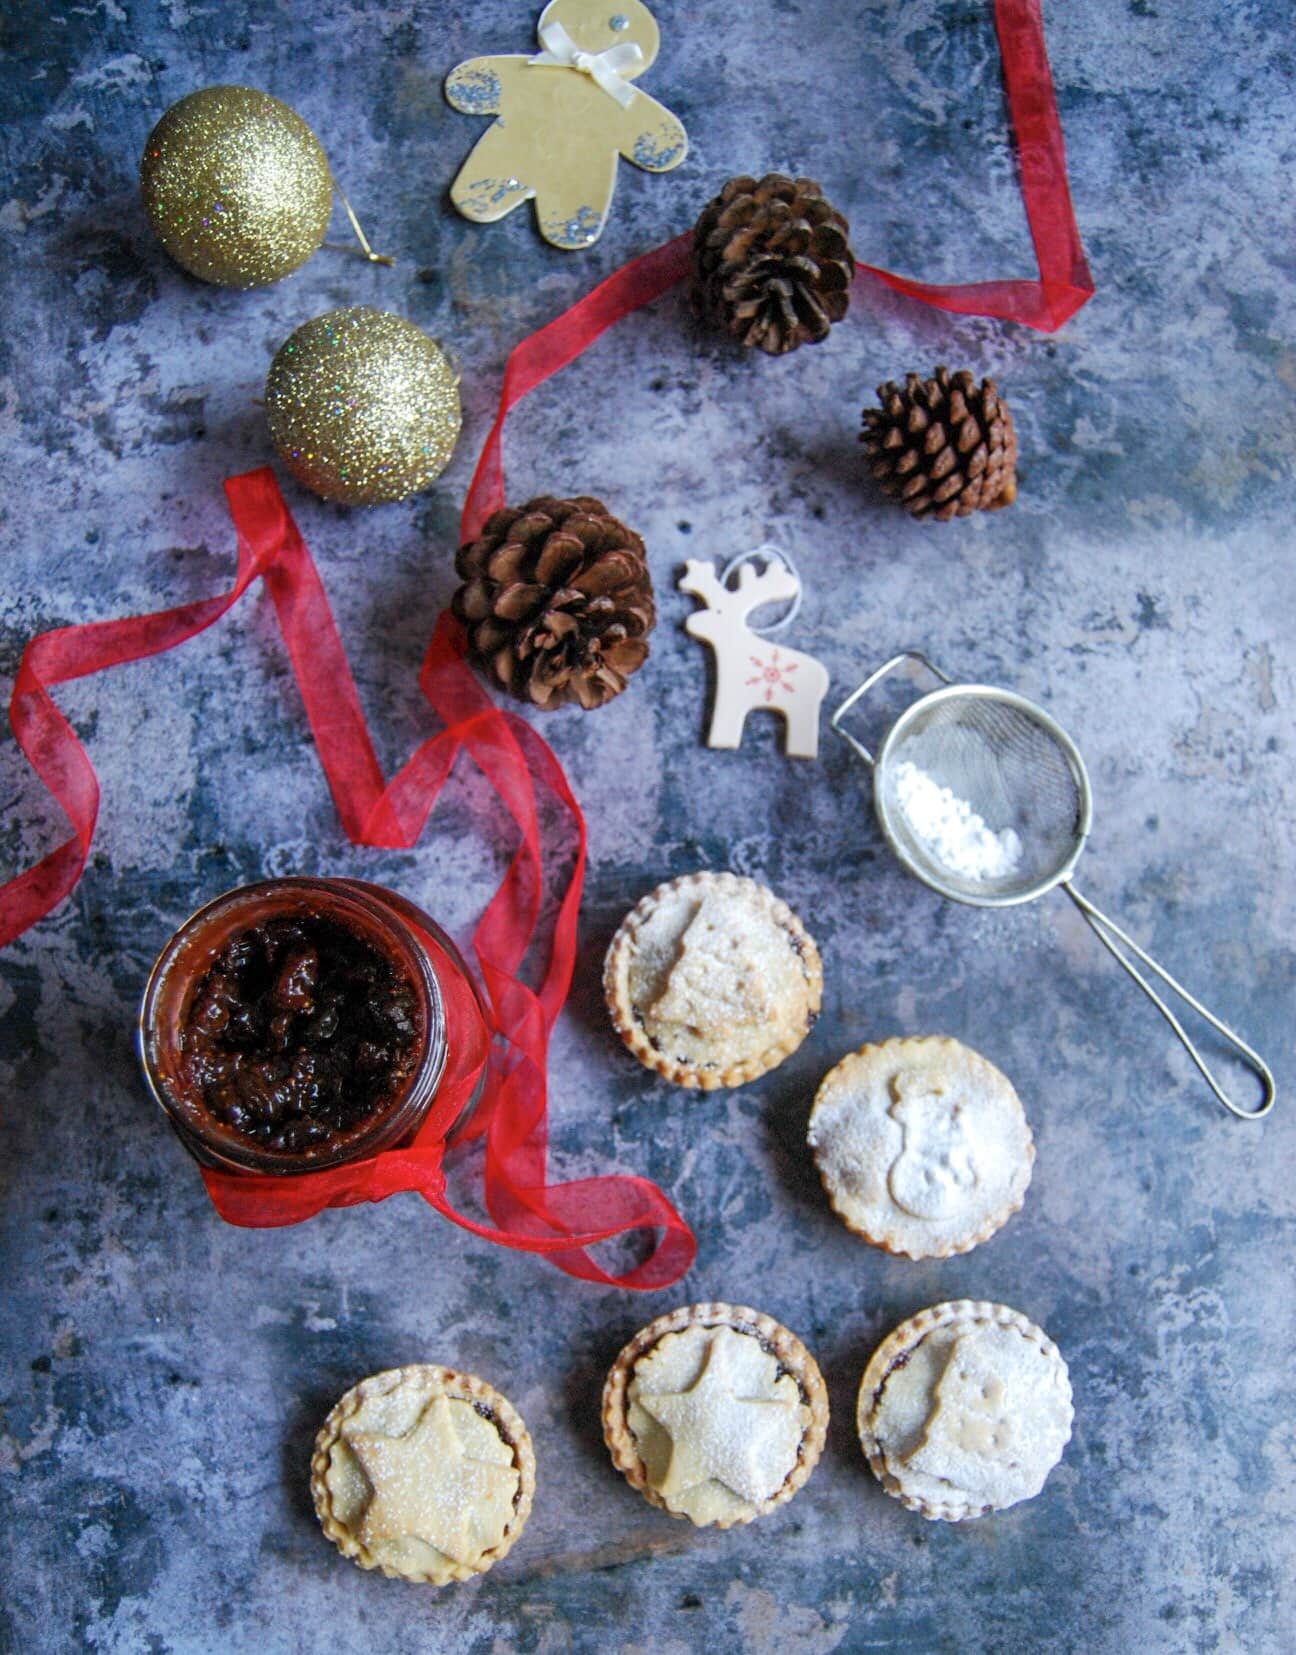 A jar of chocolate and cherry mincemeat and mince pies dusted with icing sugar. Christmas baubles and decorations are scattered around in a decorative fashion